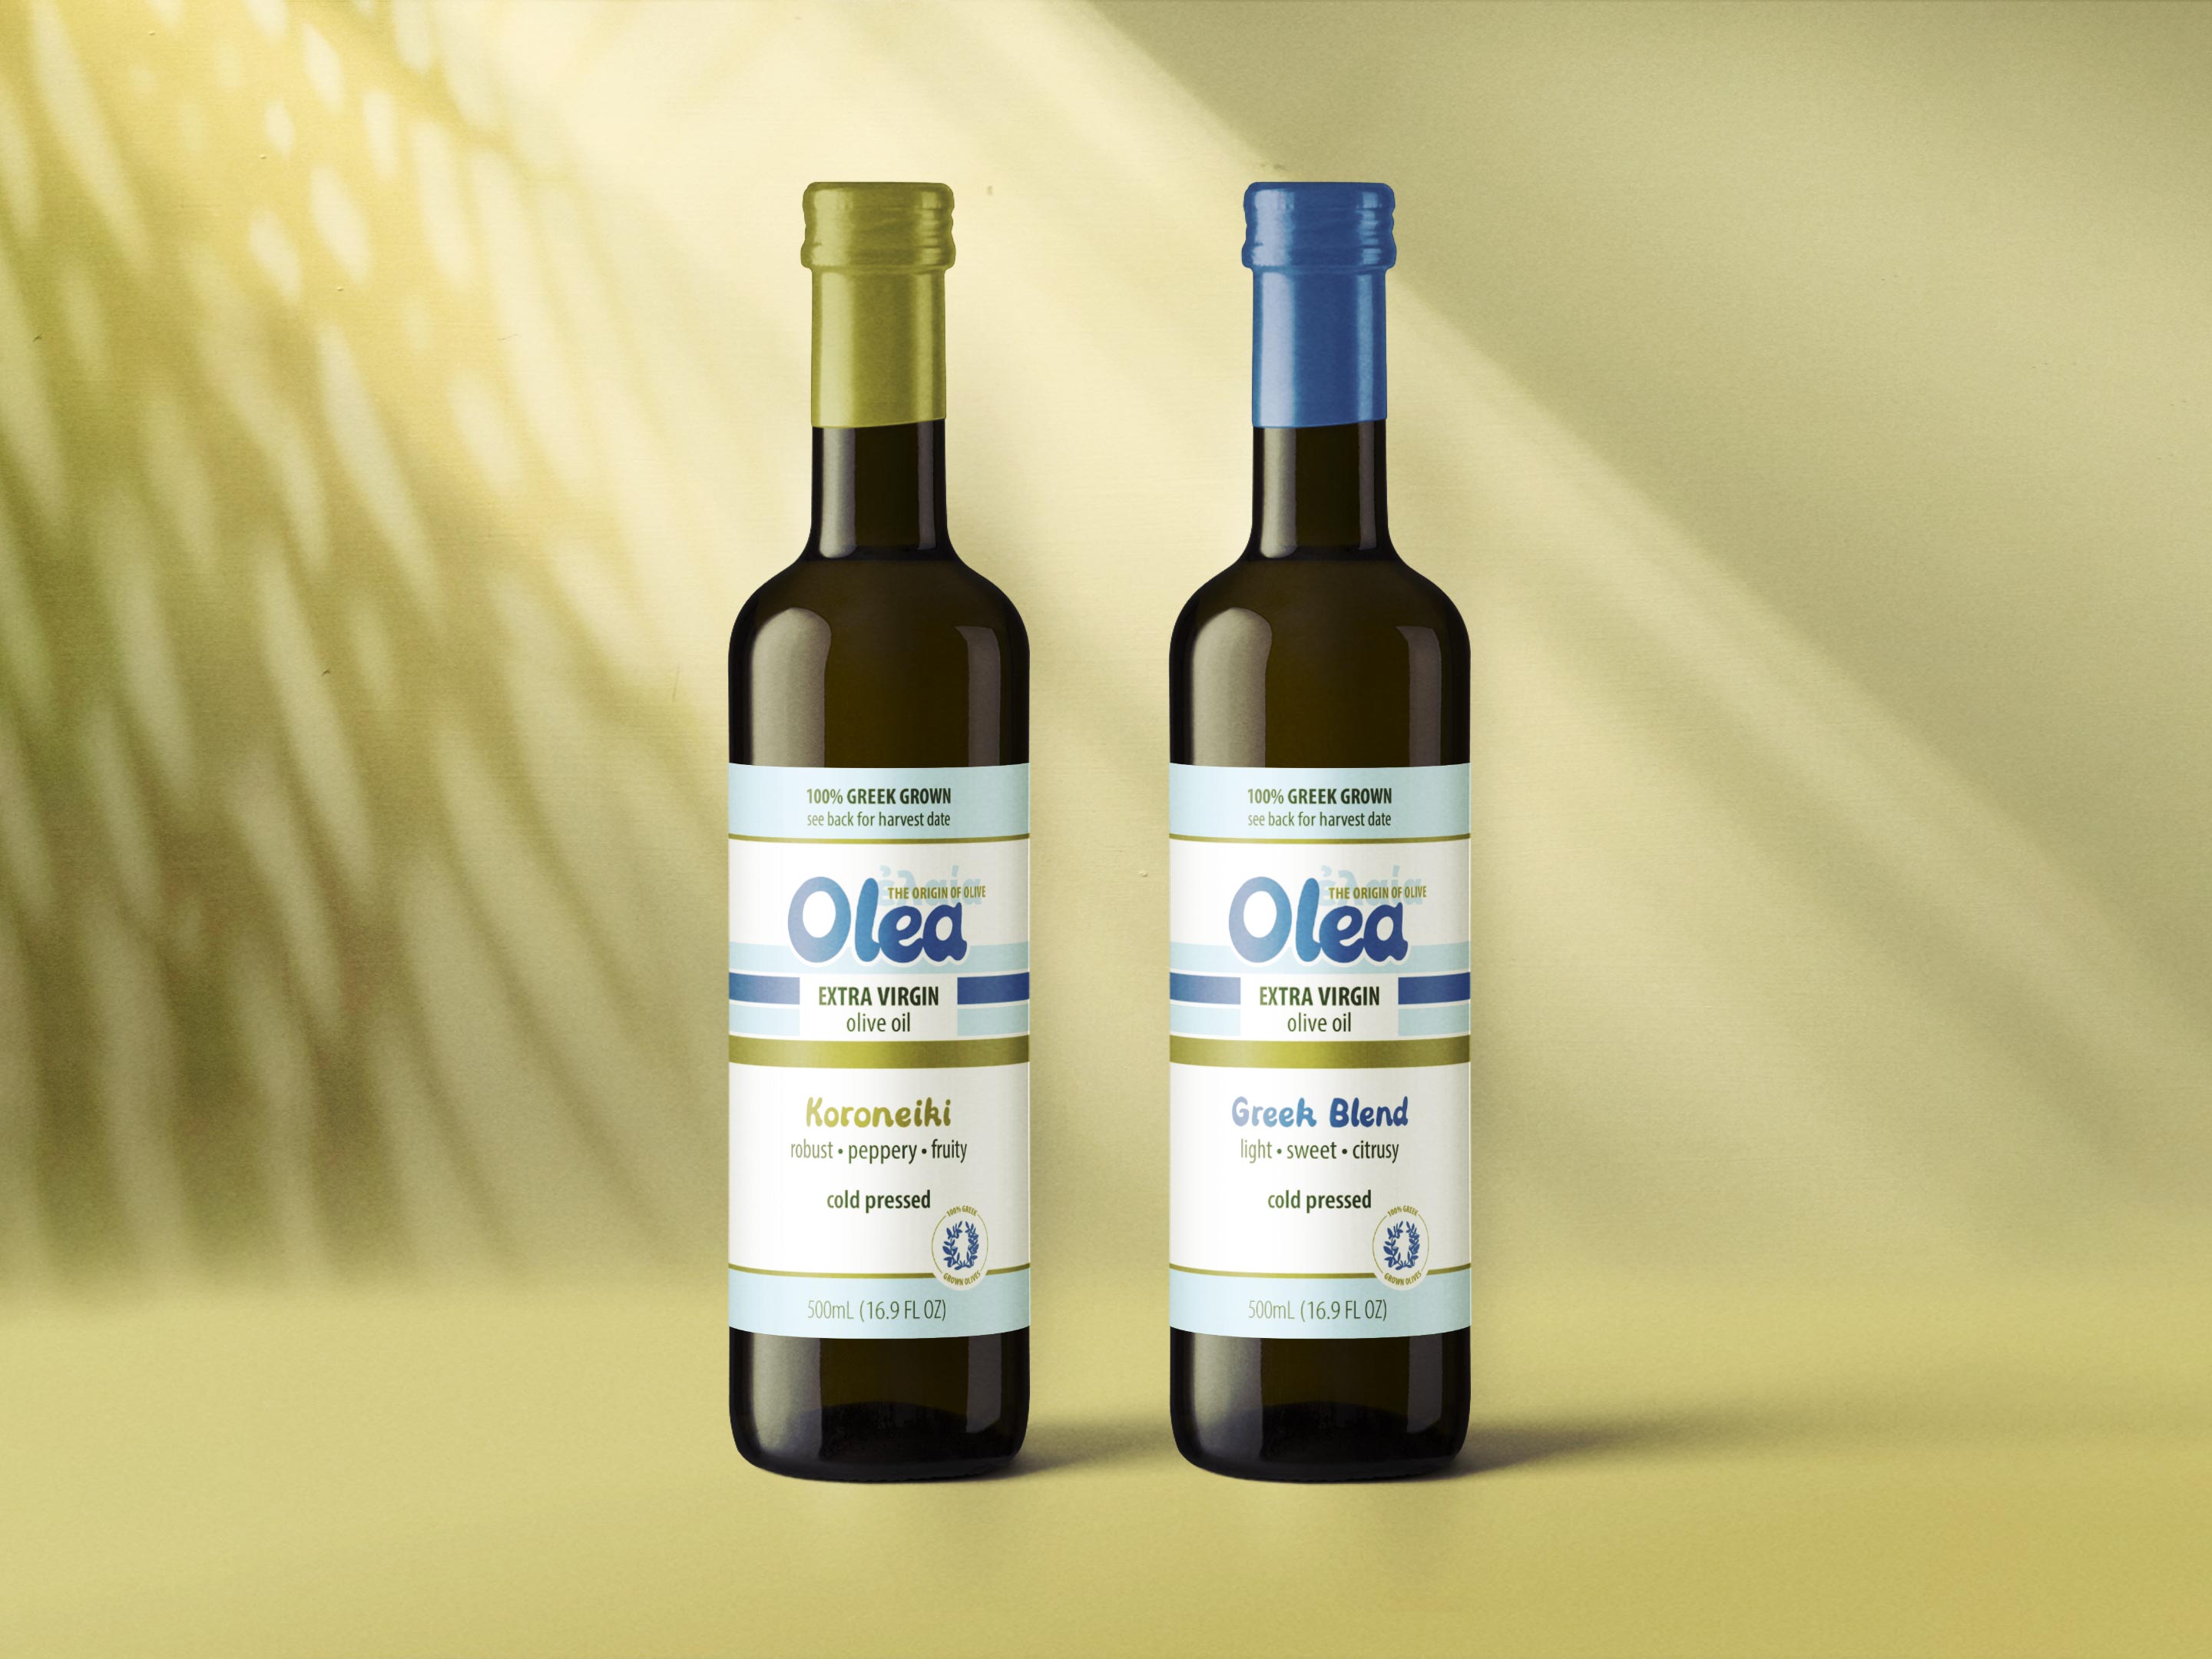 Two olive oil bottles with a white, blue, and gold label design